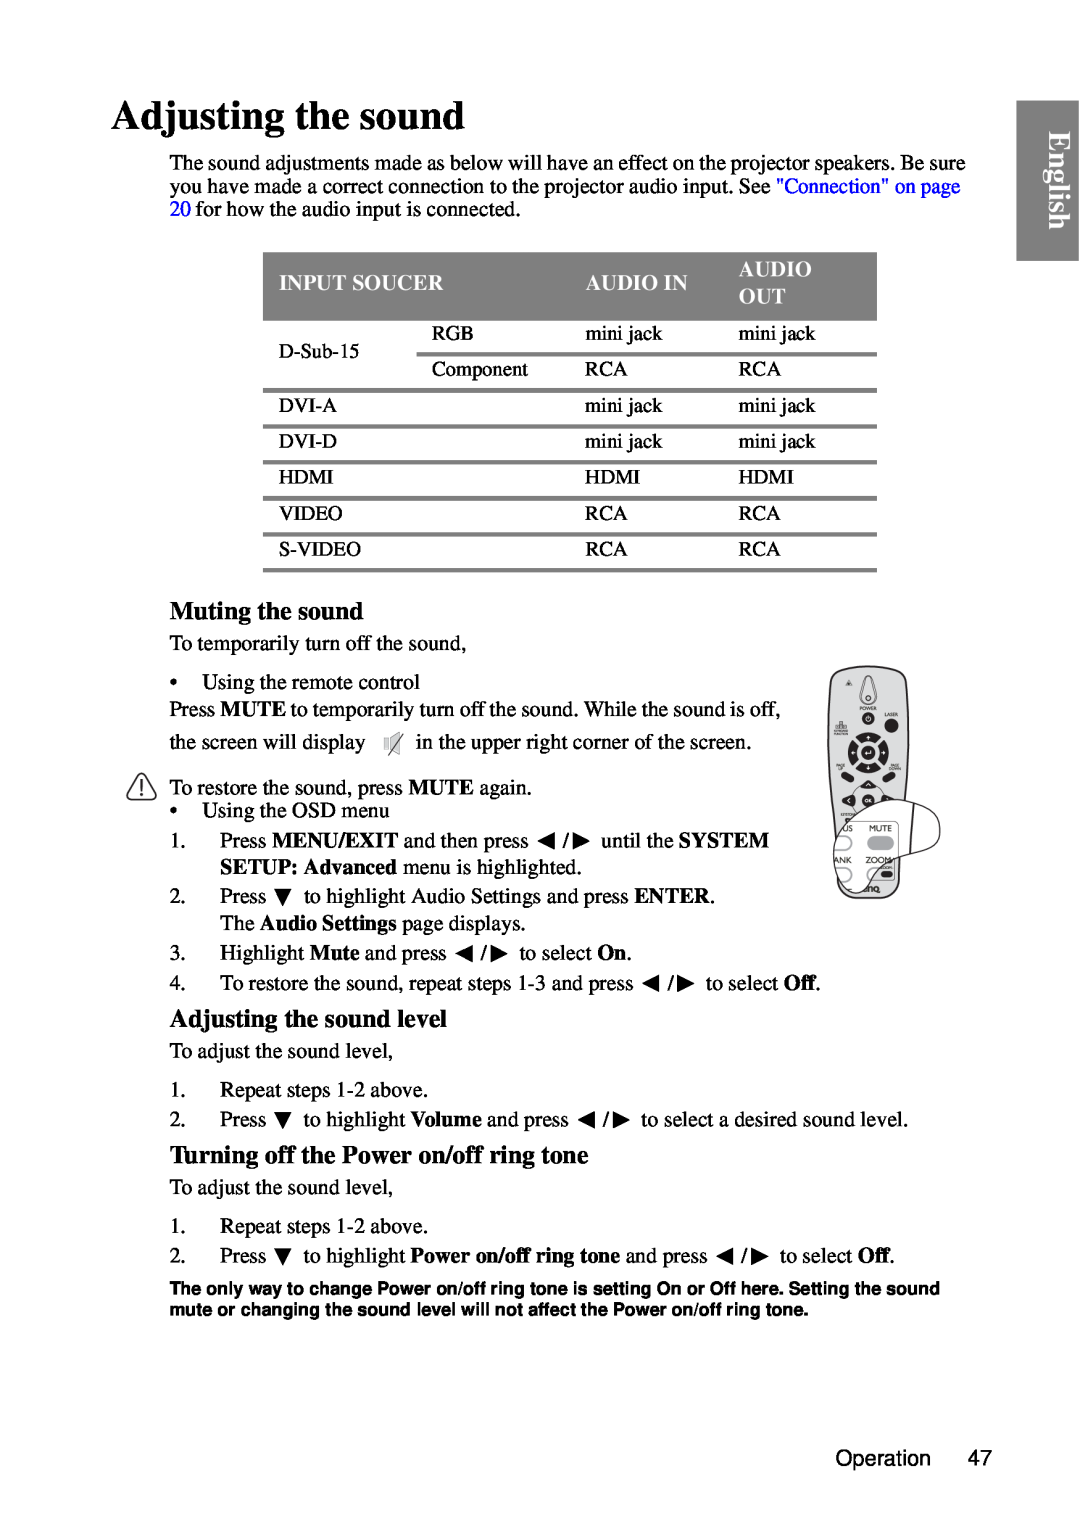 BenQ MP727 Muting the sound, Adjusting the sound level, Turning off the Power on/off ring tone, English, Input Soucer 